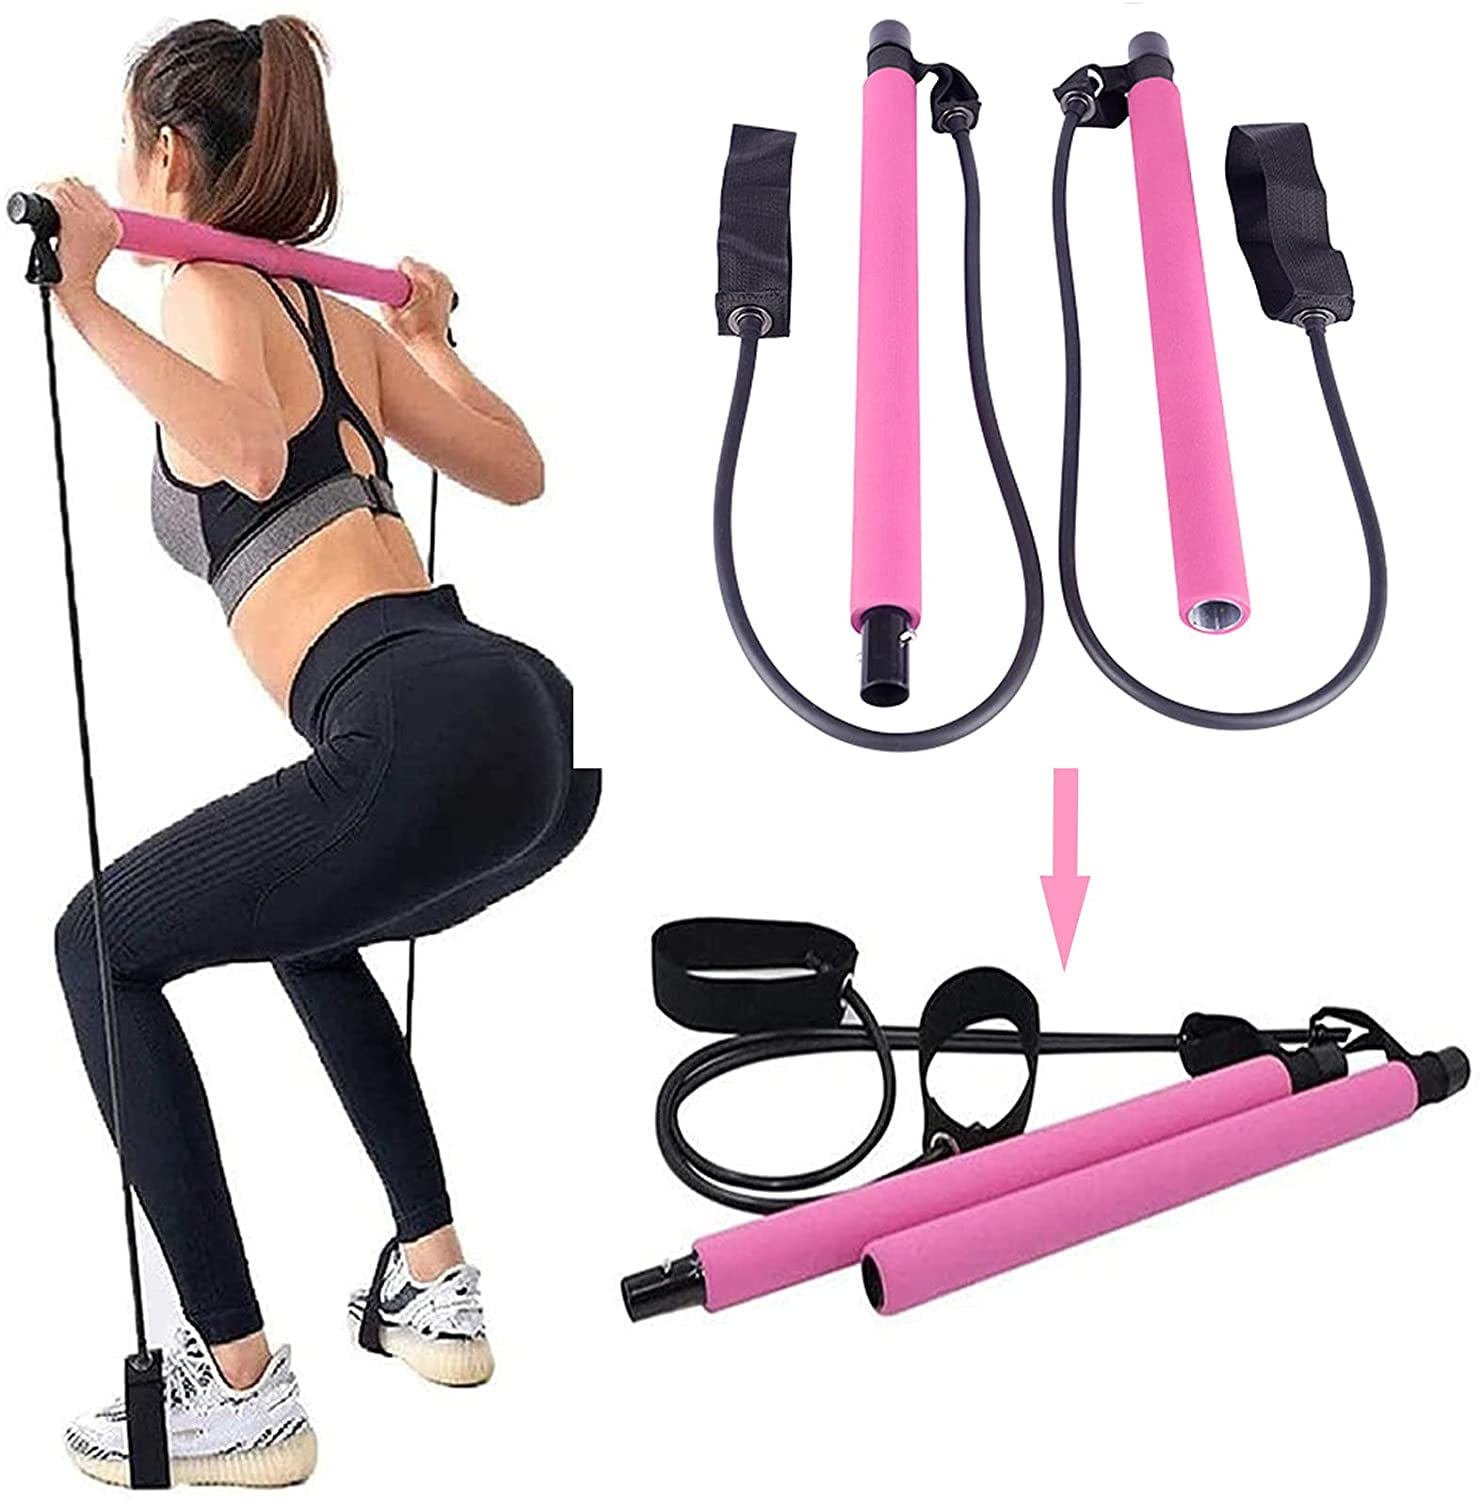 Pilates Bar Kit with Resistance Band Portable Workout Kit for Body Muscle Toning Yoga Core Strength Training for Men and Women Home Gym Equipment 8 Shape Chest Rally Pull Rope 